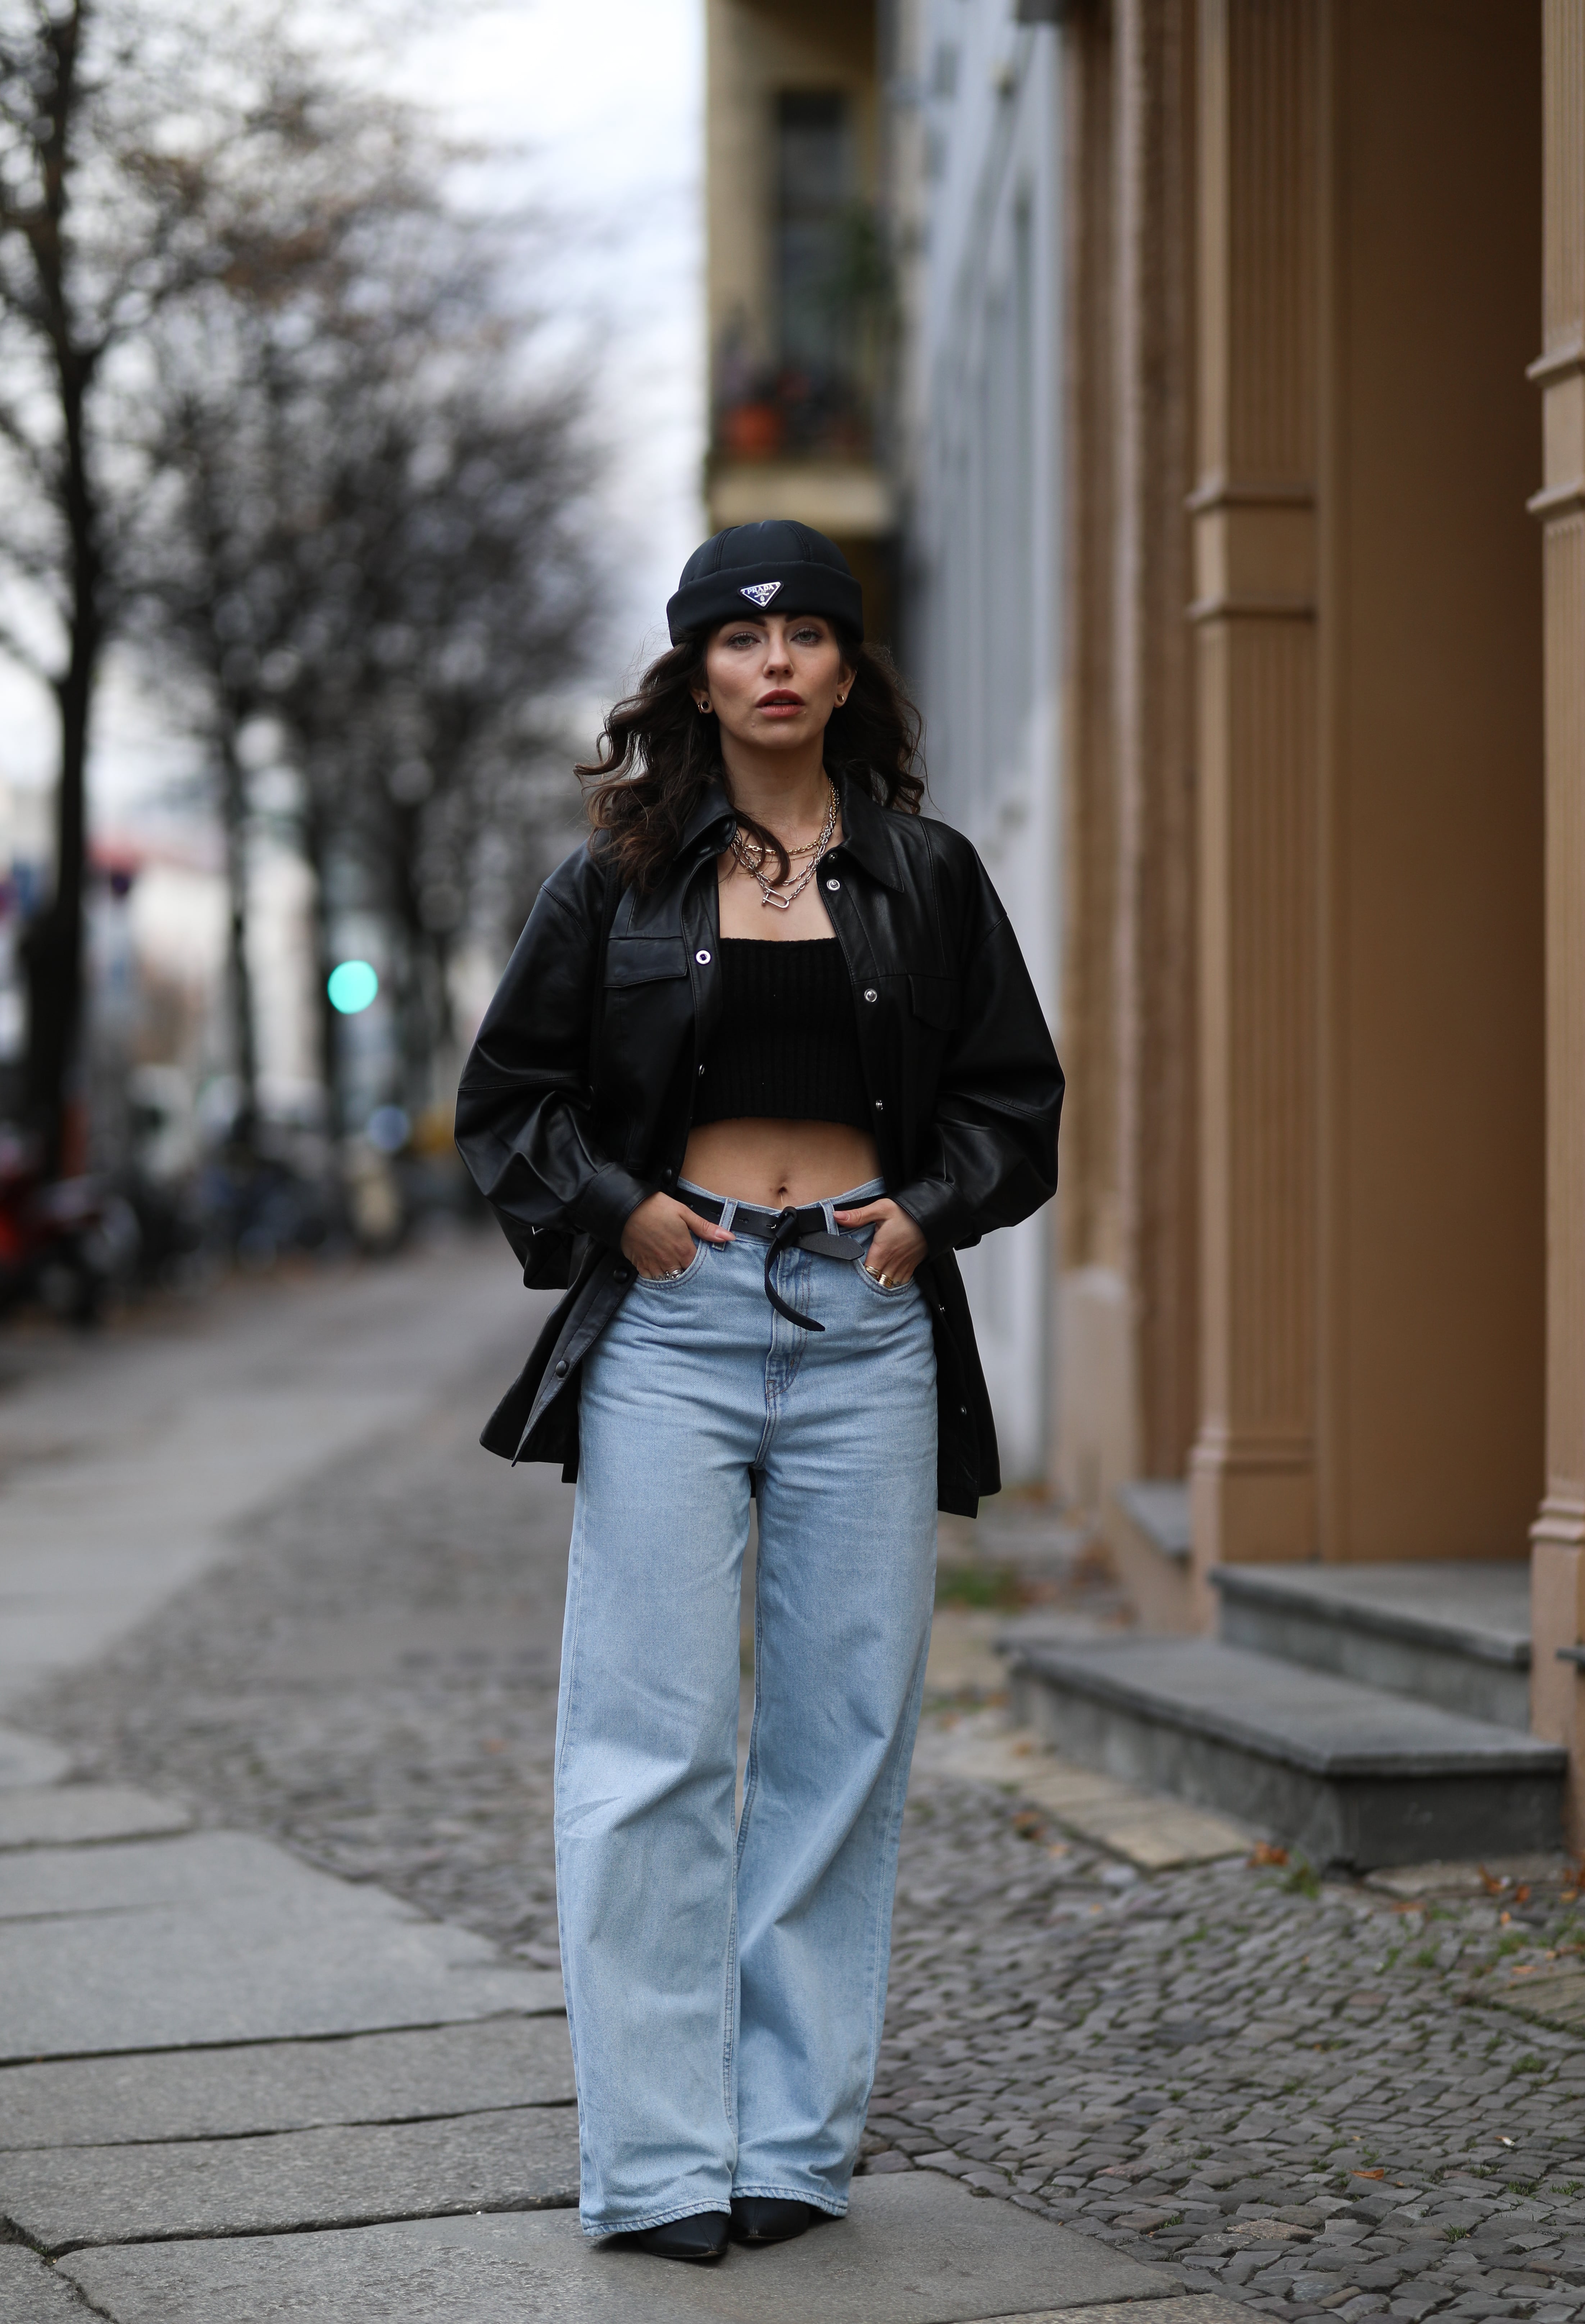 15 Baggy Jeans Outfit Ideas to Save to Your Camera Roll